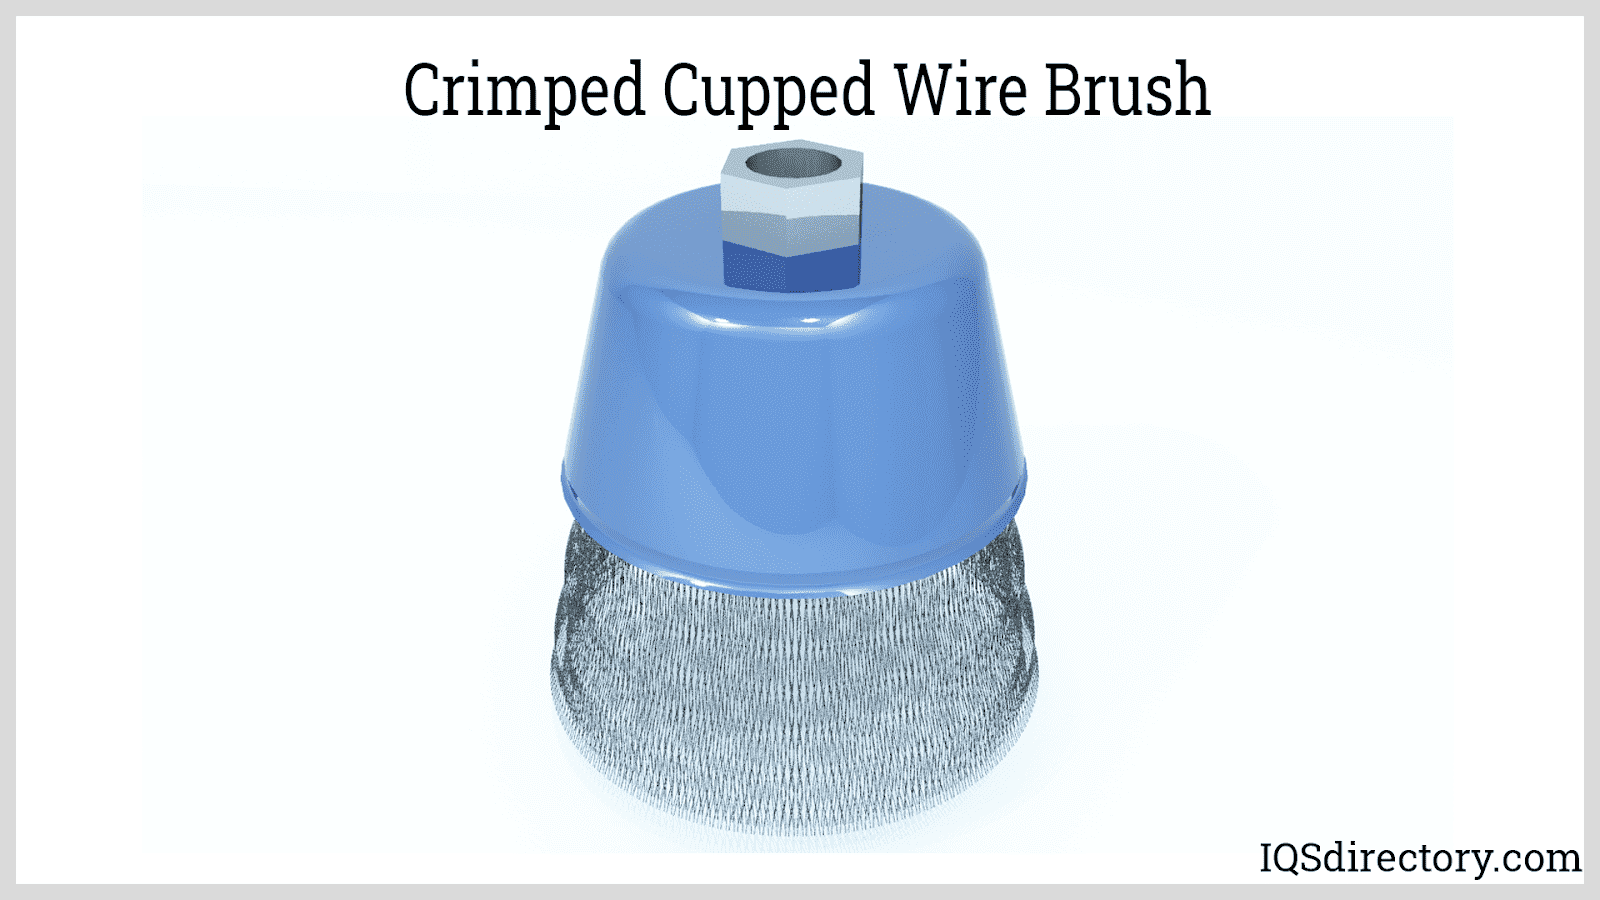 Crimped Cupped Wire Brush